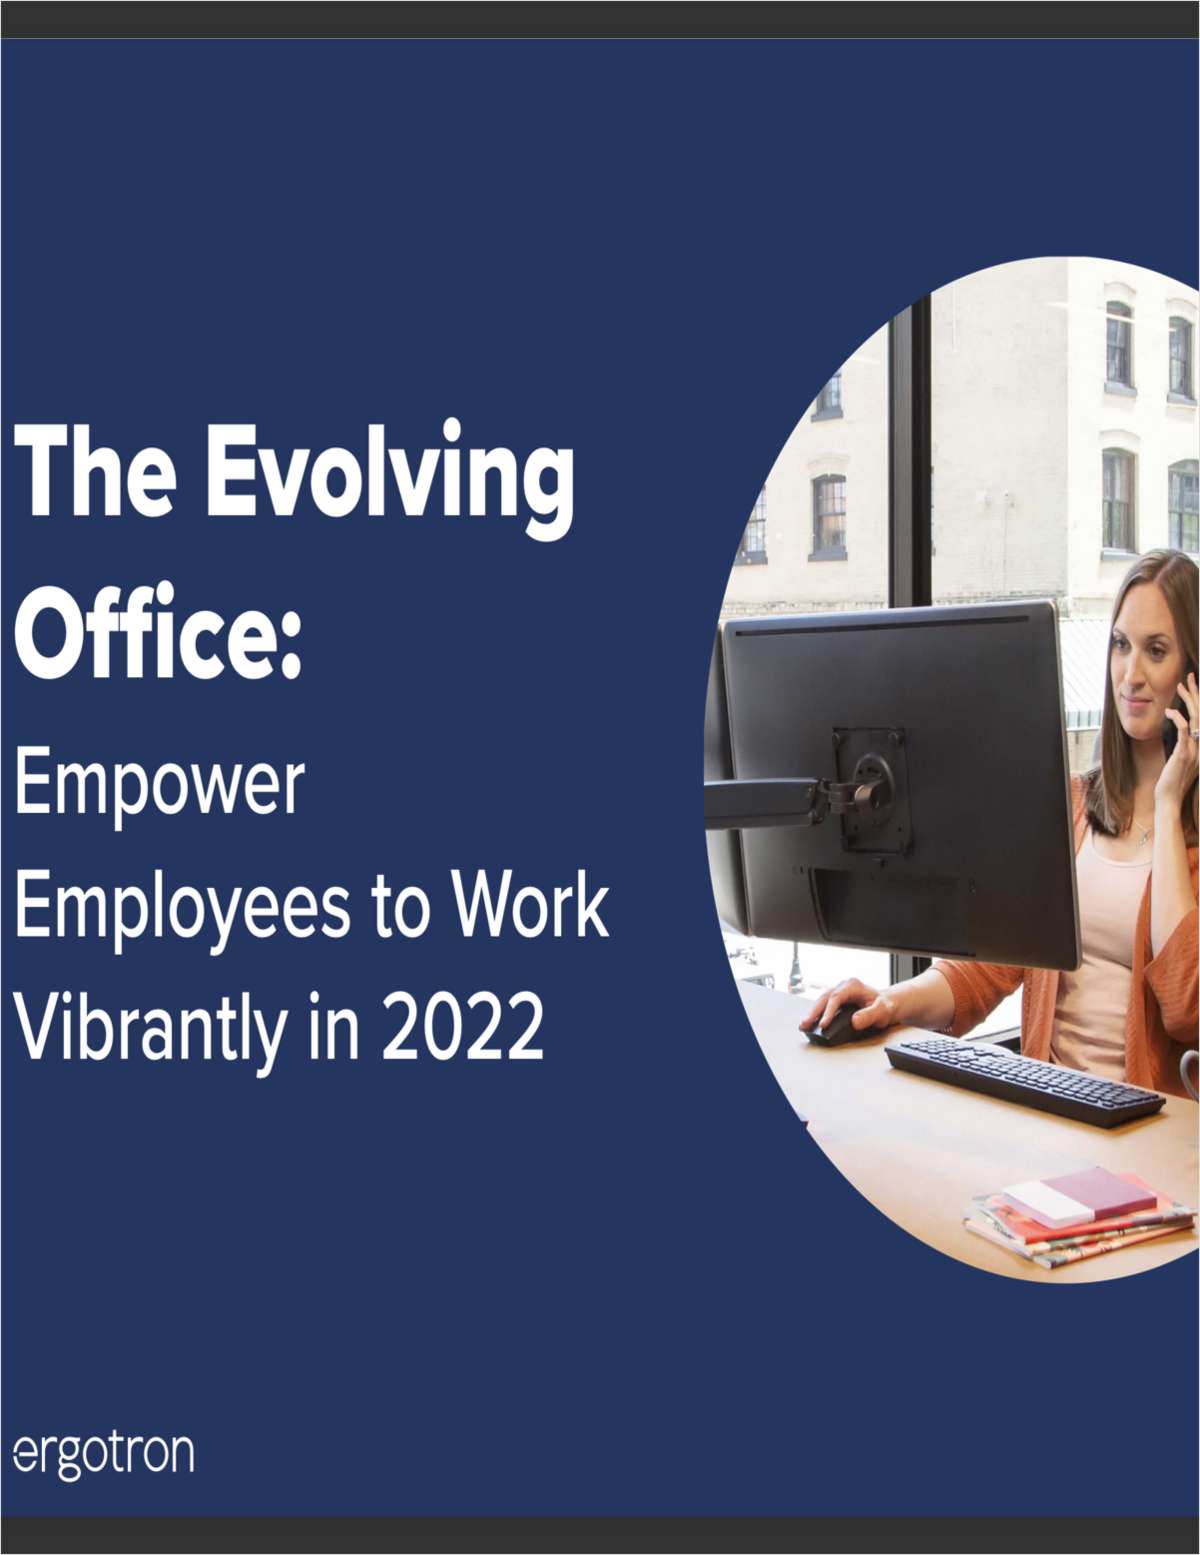 The Evolving Office: Empower Employees to Work Vibrantly in 2022